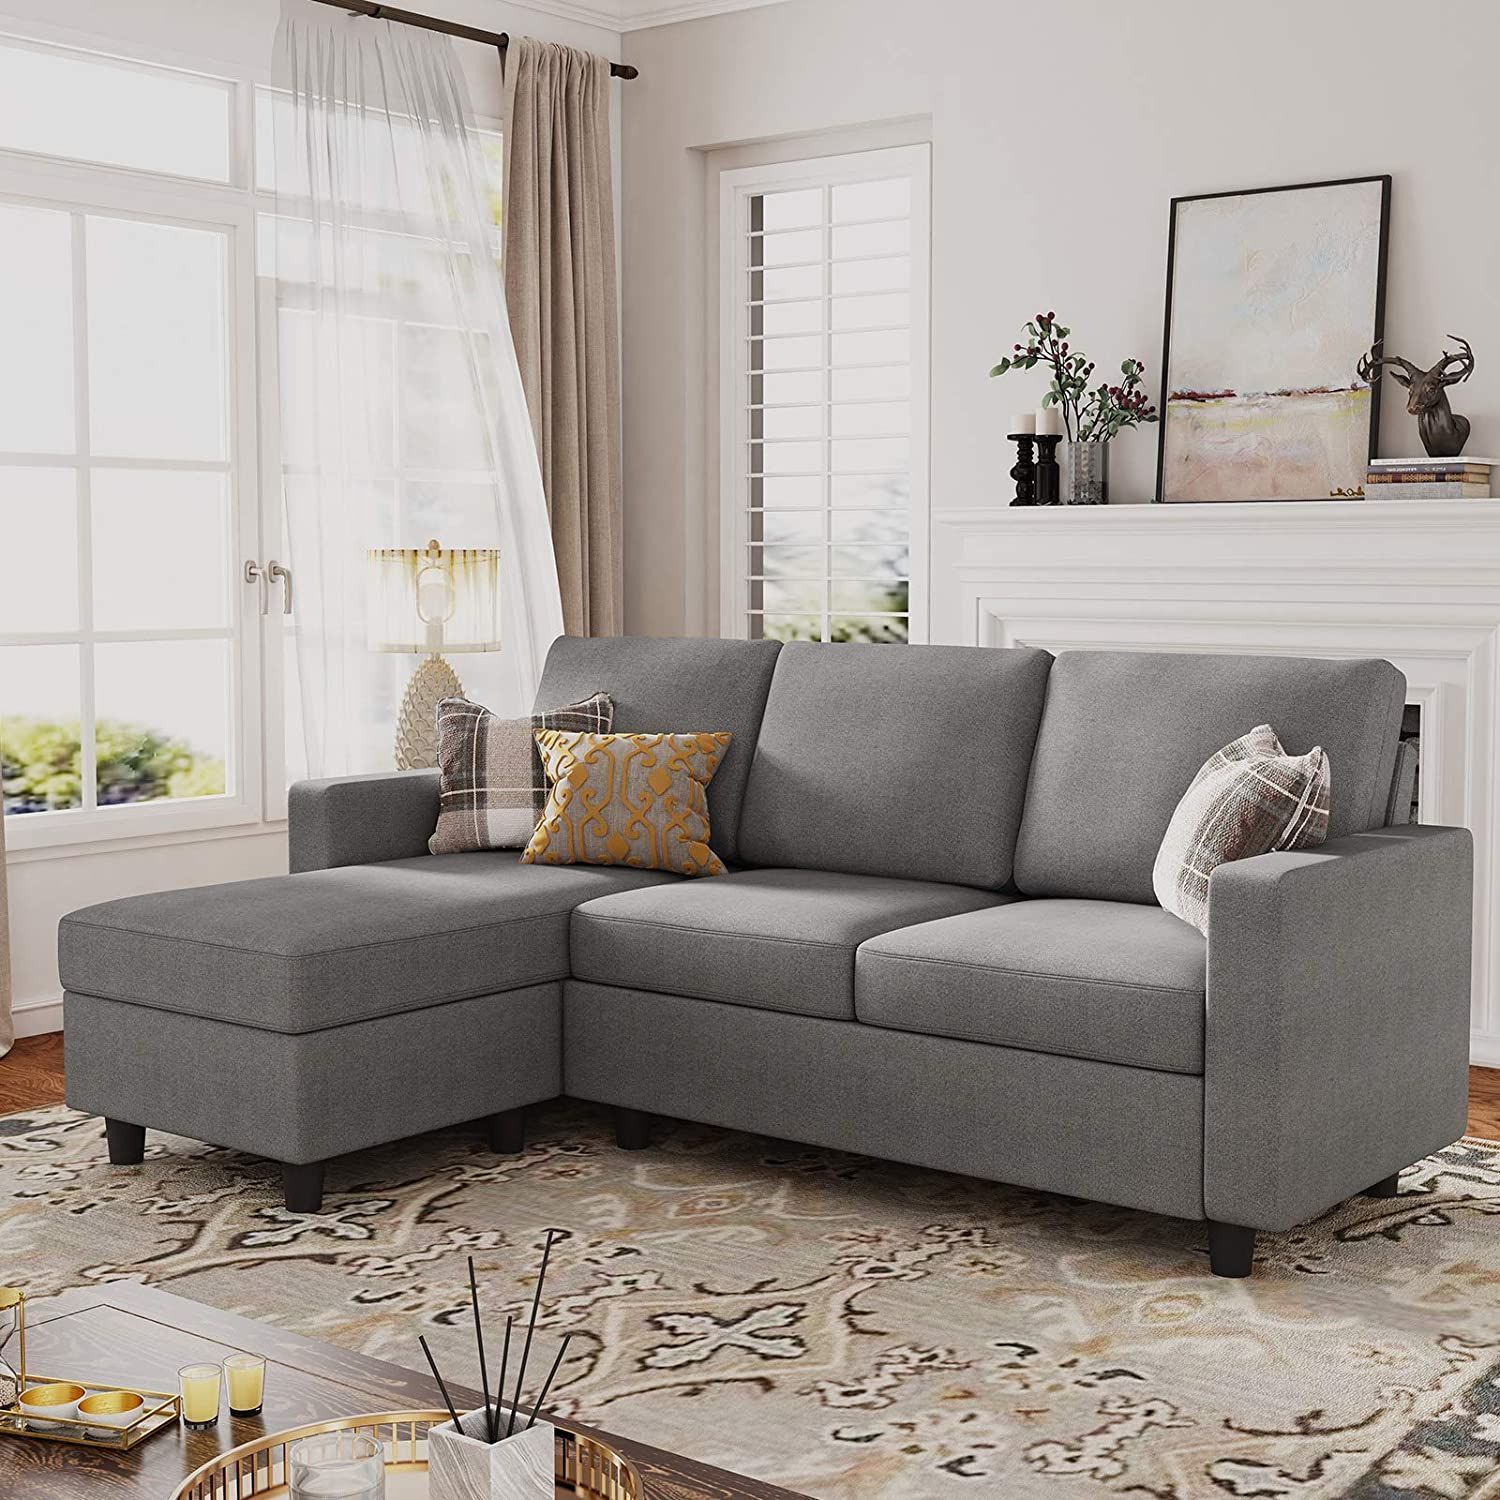 Honbay Dryades L Shaped Sectional Sofa, Gray Fabric – Walmart | Sofas  For Small Spaces, Couches For Small Spaces, Sectional Sofa Couch Throughout L Shapped Apartment Sofas (Photo 5 of 15)